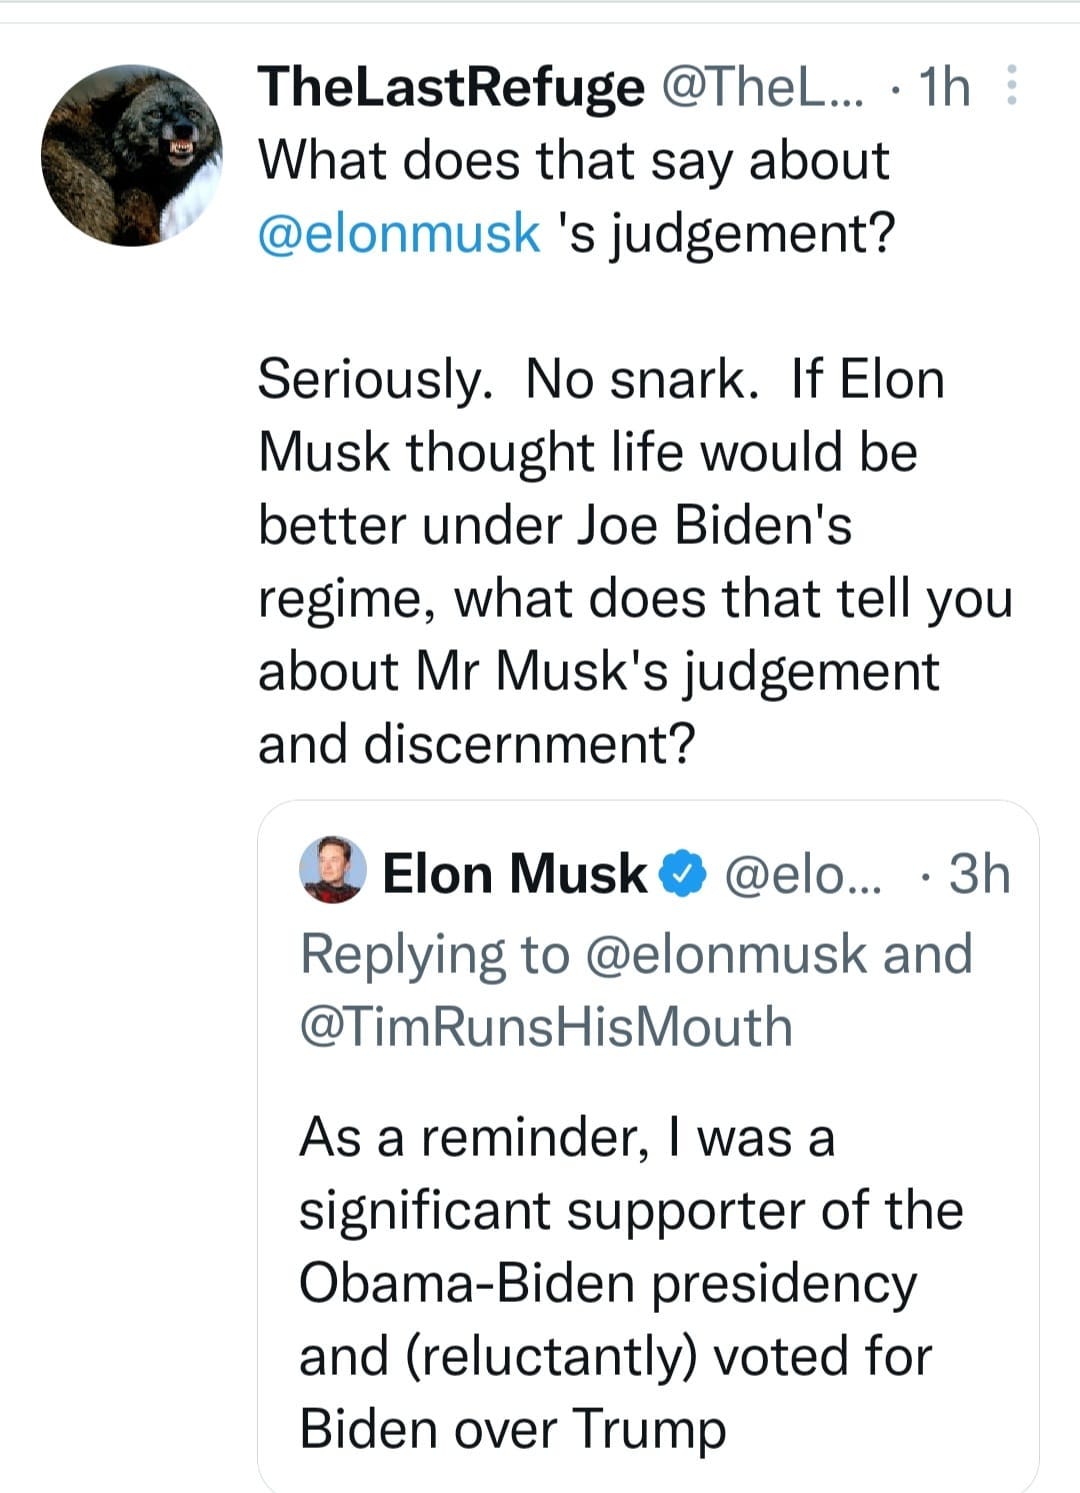 May be a Twitter screenshot of 1 person and text that says 'TheLastRefuge @TheL... 1h What does that say about @elonmusk 's judgement? Seriously. No snark. If Elon Musk thought life would be better under Joe Biden's regime, what does that tell you about Mr Musk's judgement and discernment? Elon Musk @elo... 3h Replying to @elonmusk and @TimRunsHisMouth As a reminder, was a significant supporter of the Obama-Biden presidency and (reluctantly) voted for Biden over Trump'